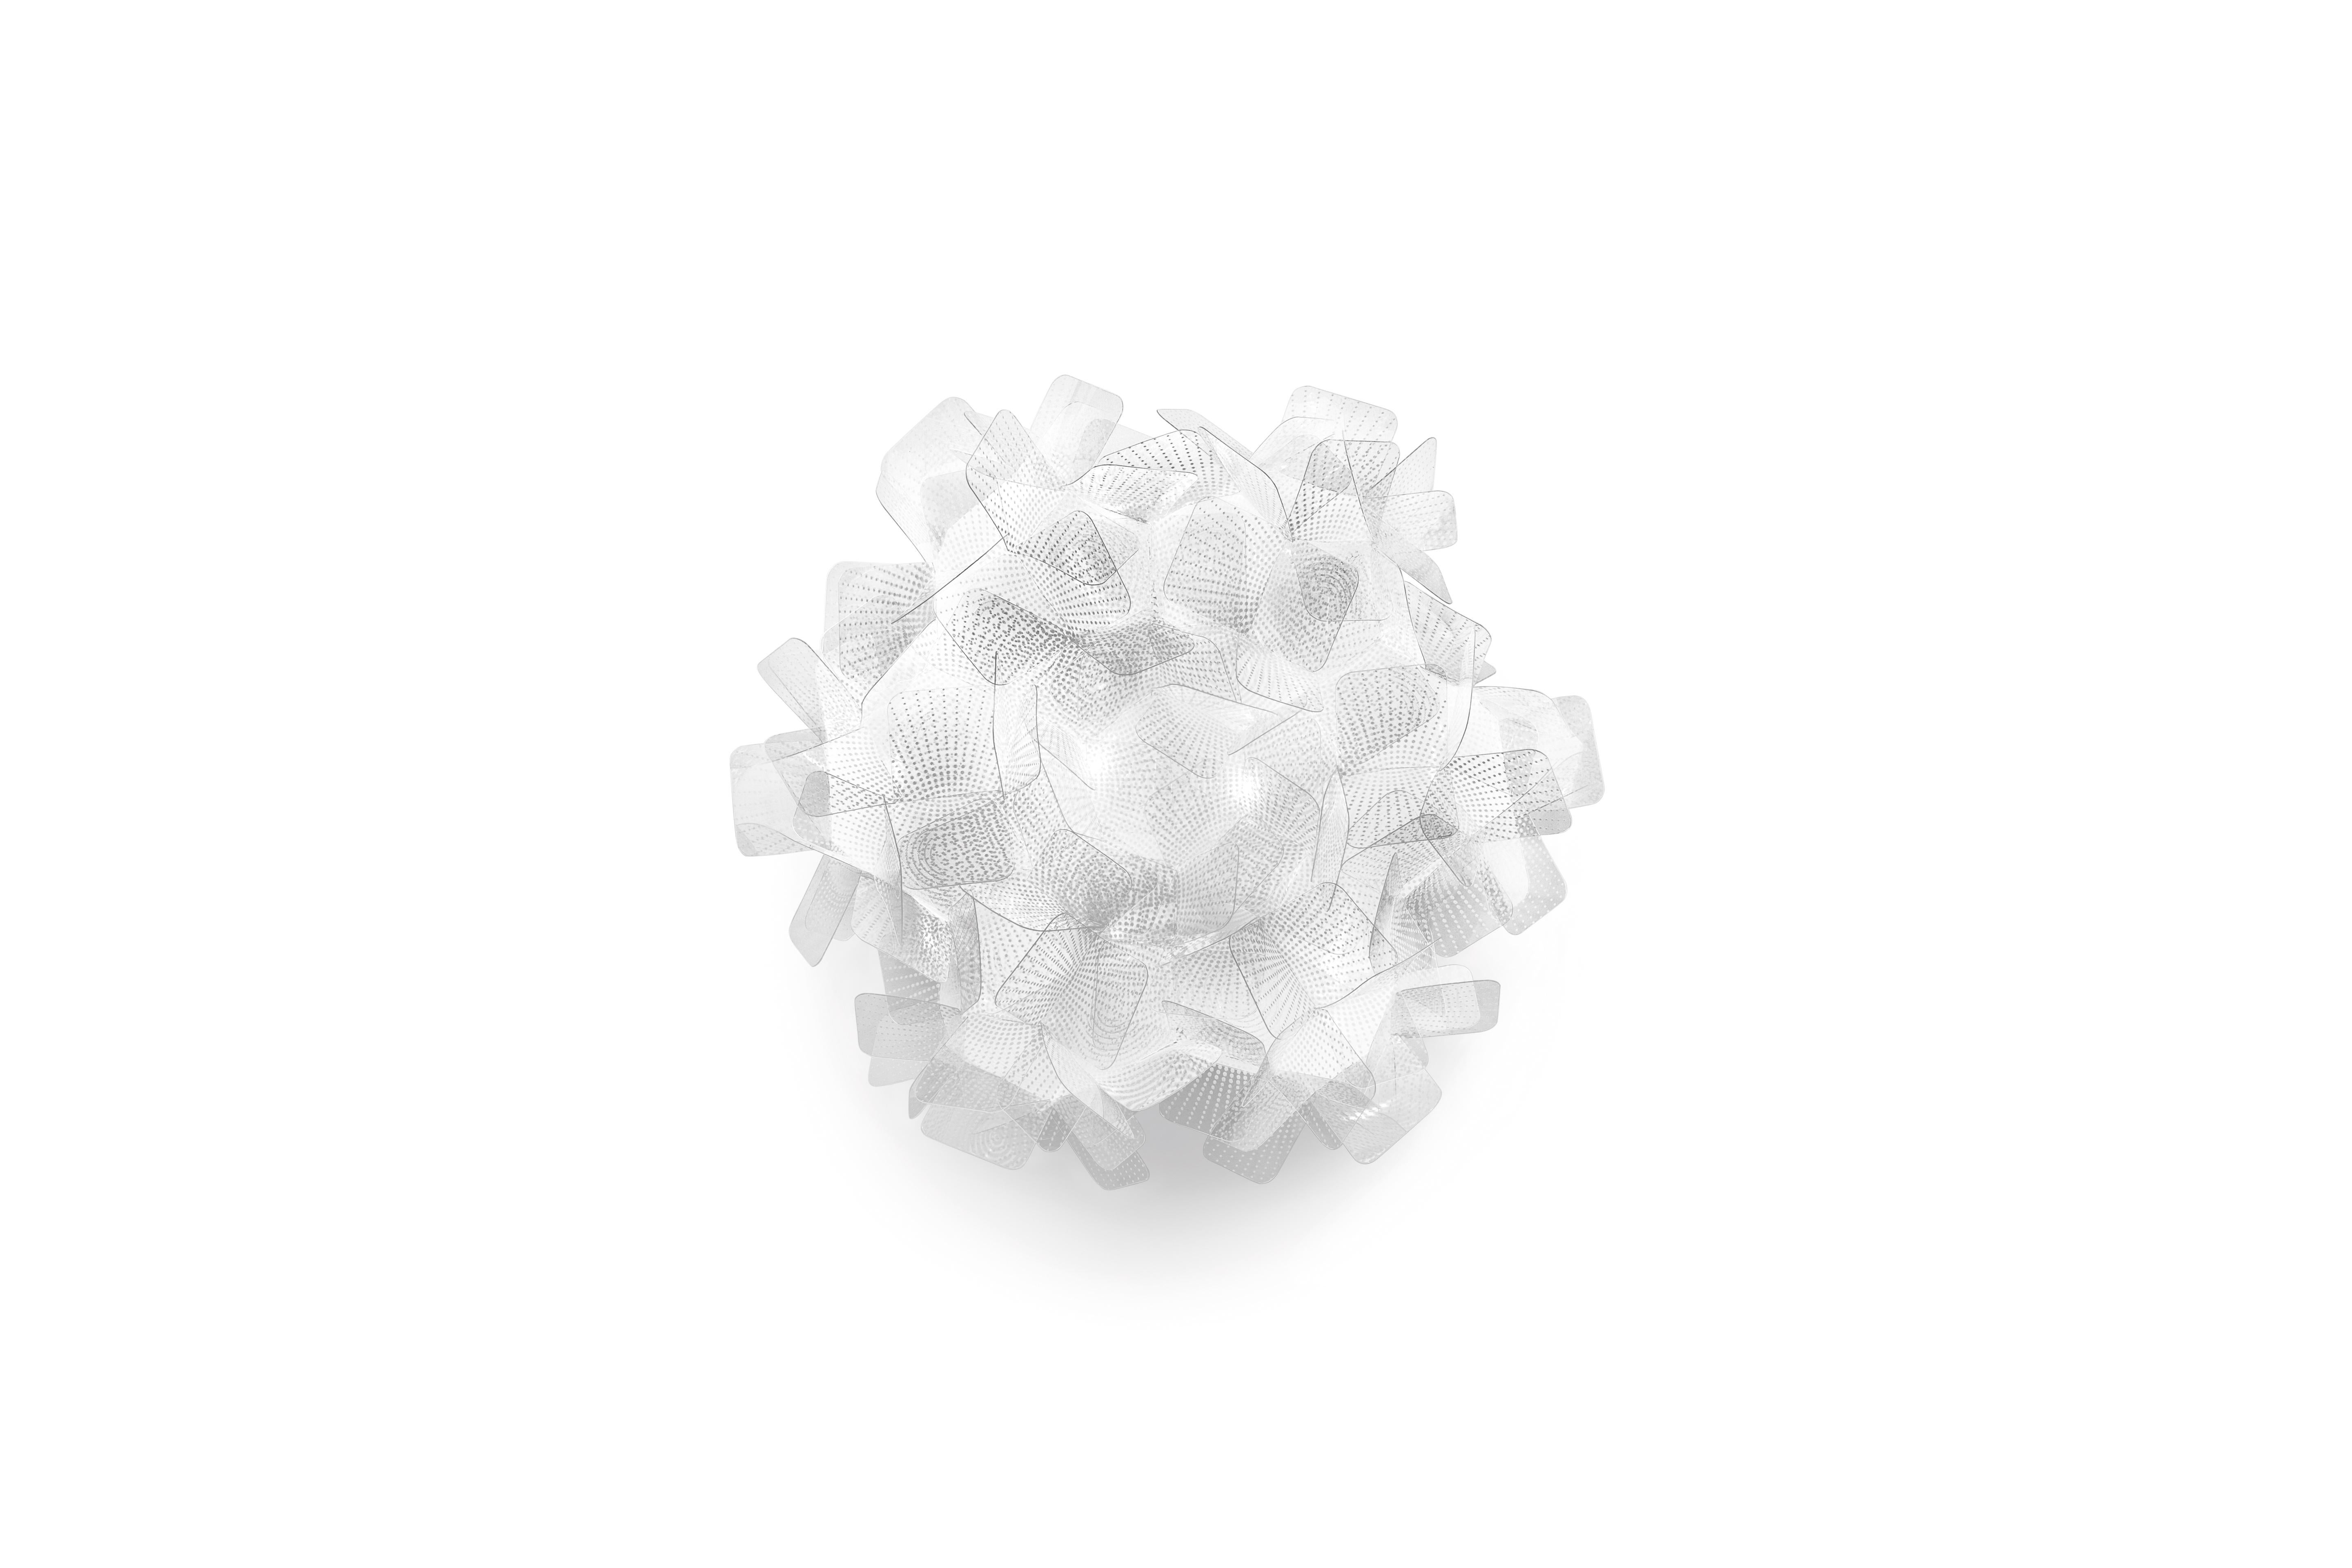 Handcrafted from interlocking Cristalflex® petals, complete with a magnetic system that allows for easy installation and cleaning, Clizia Pixel ceiling (or wall sconce) is covered in a white, tech-inspired pattern. A white dusting inside the